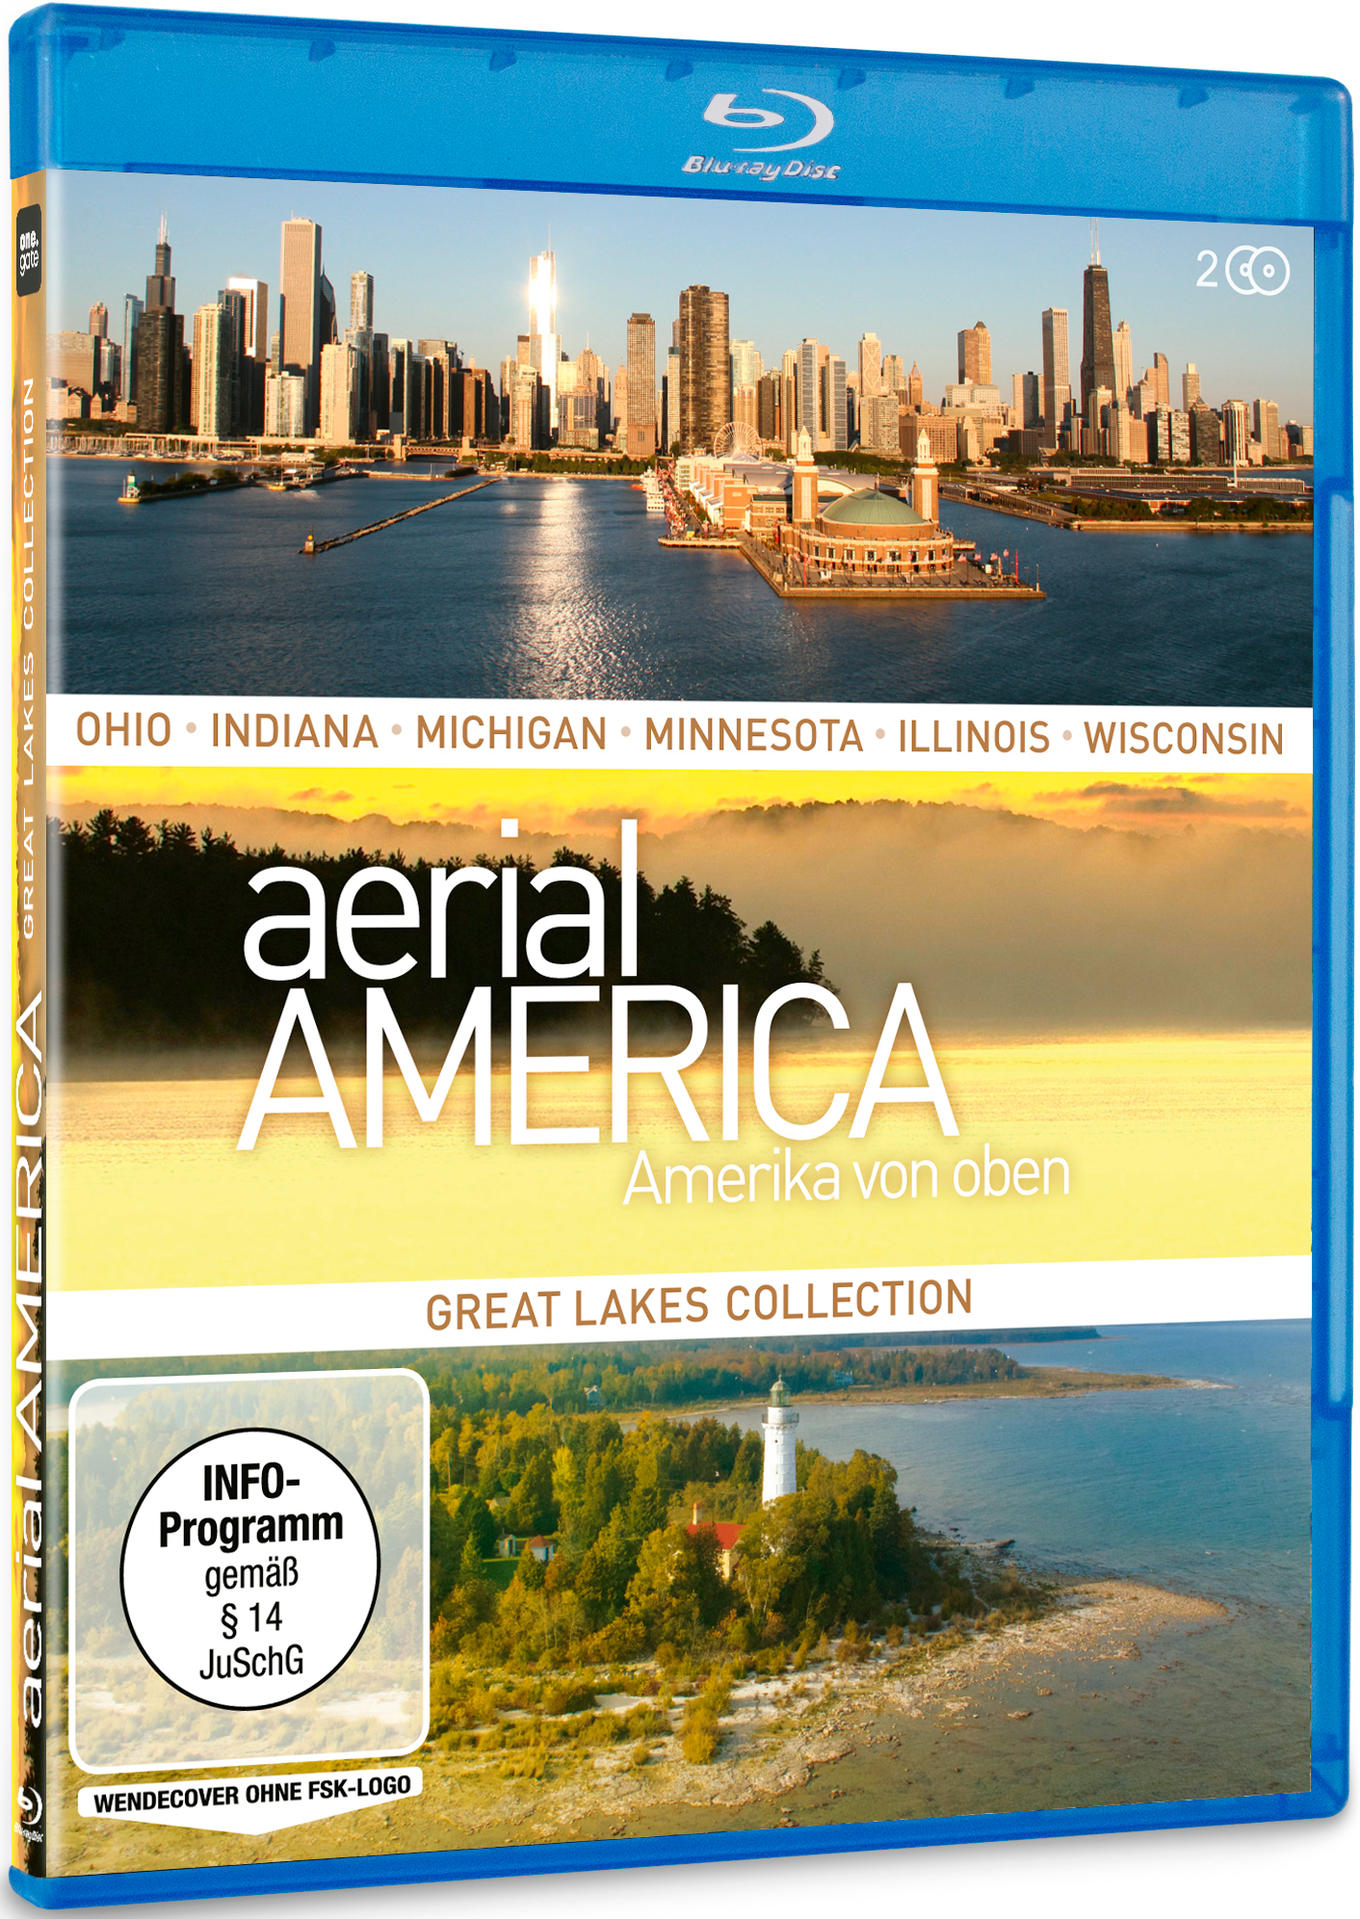 Aerial America - Amerika Collection von Lakes Blu-ray Great oben